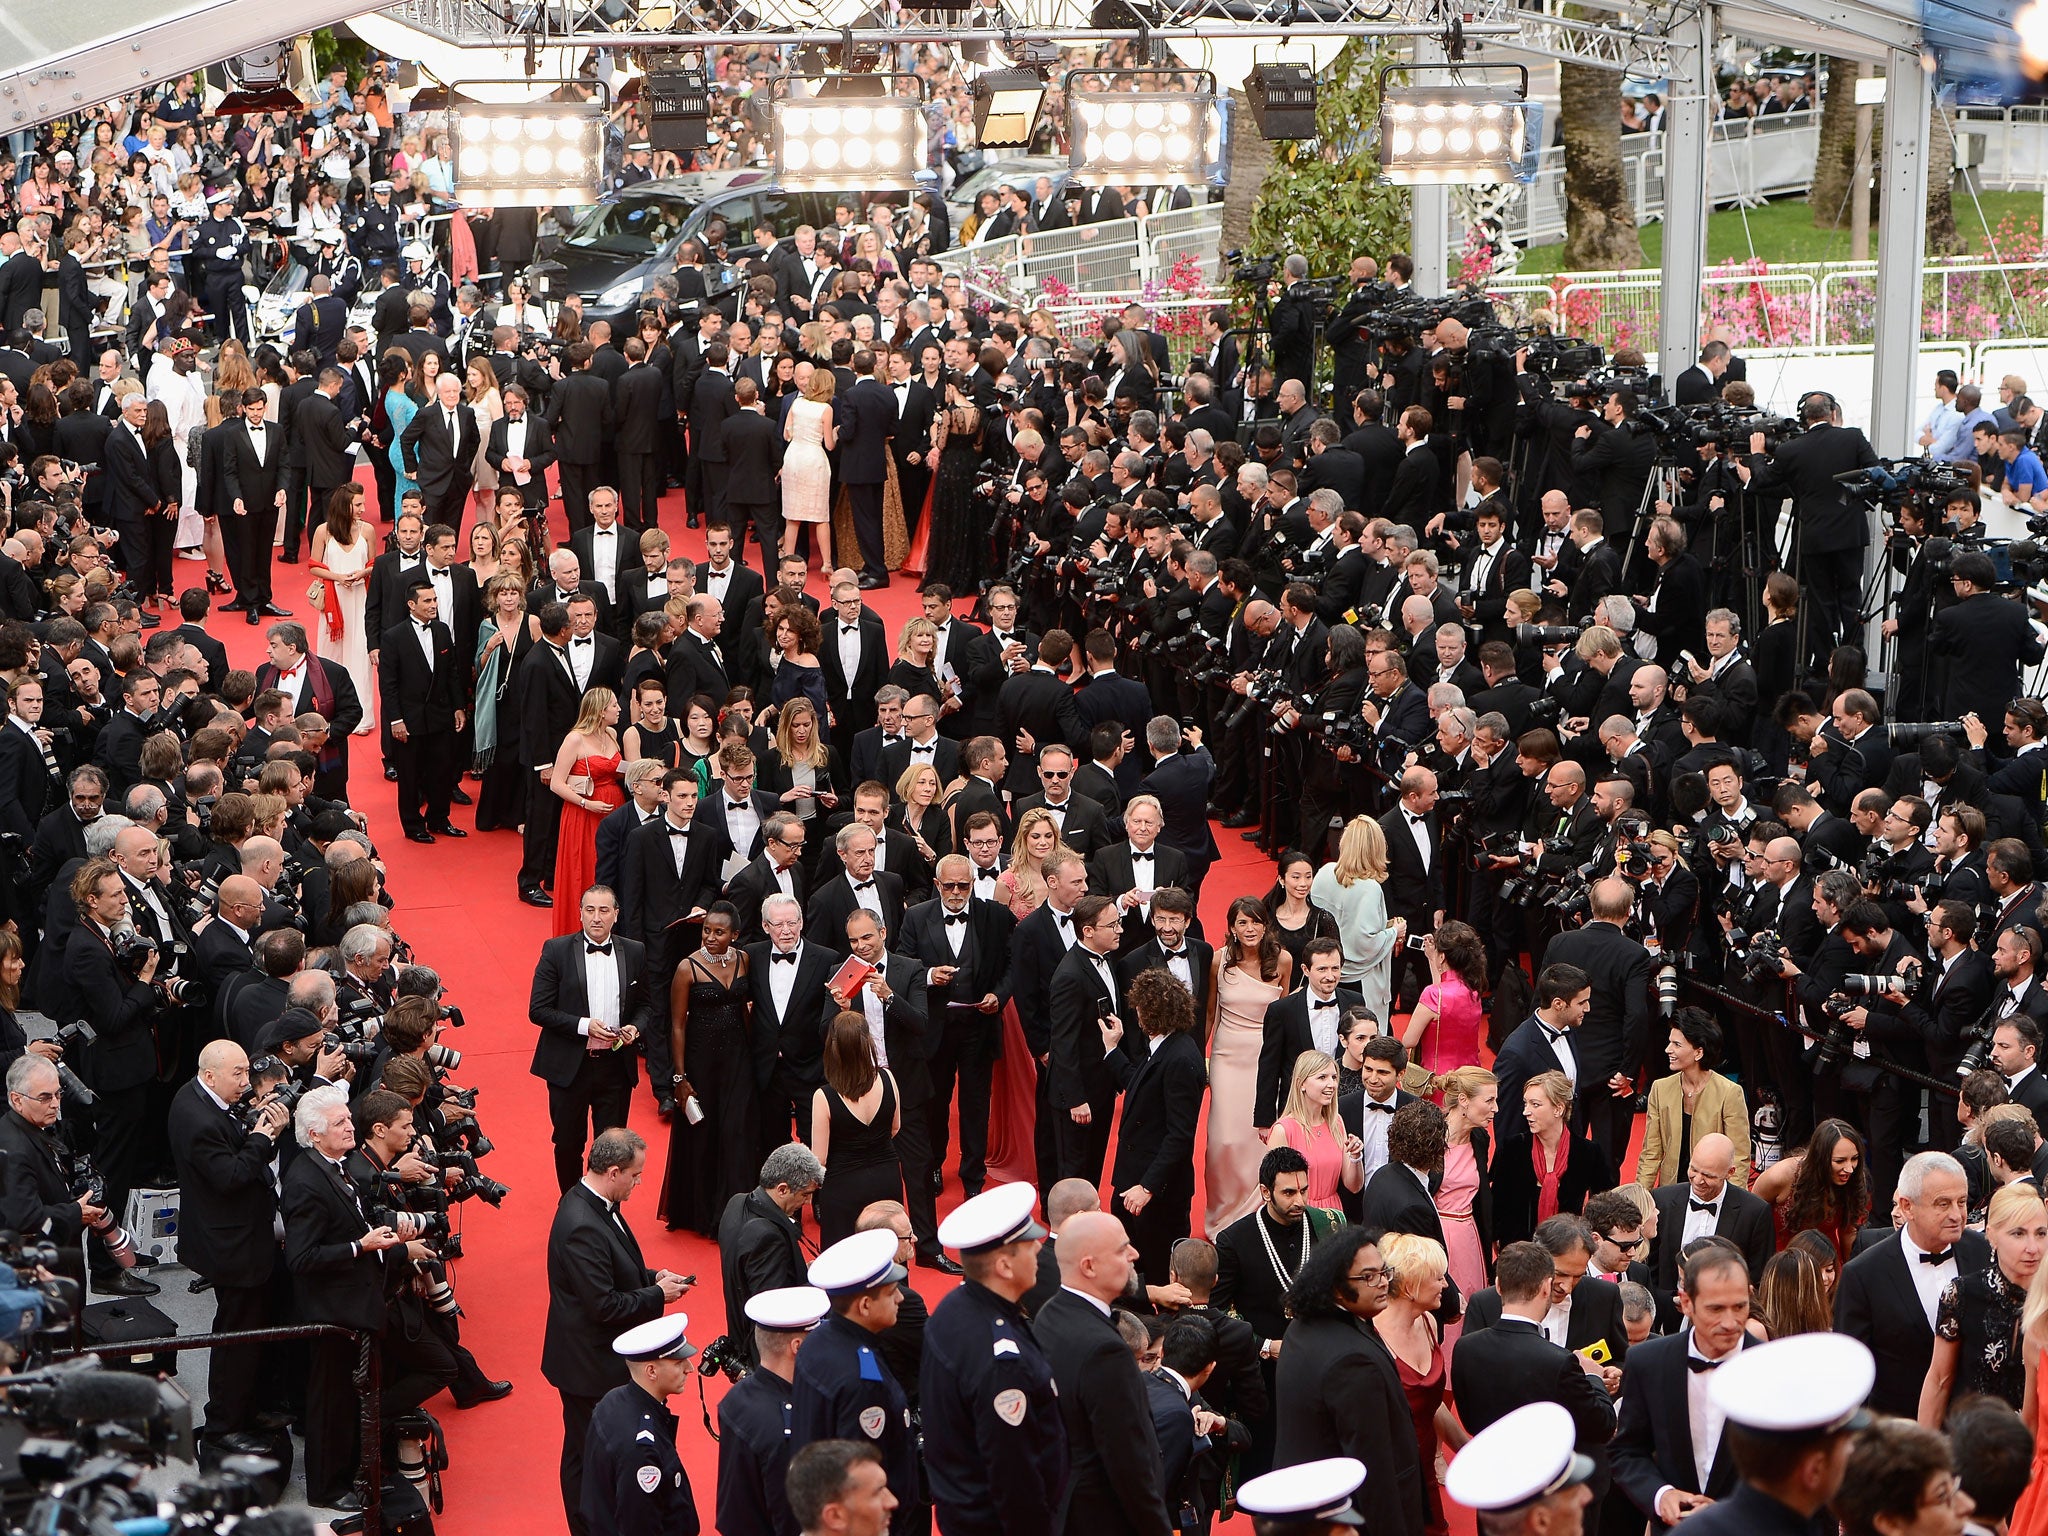 Film industry figures arrive on the Cannes Film Festival red carpet